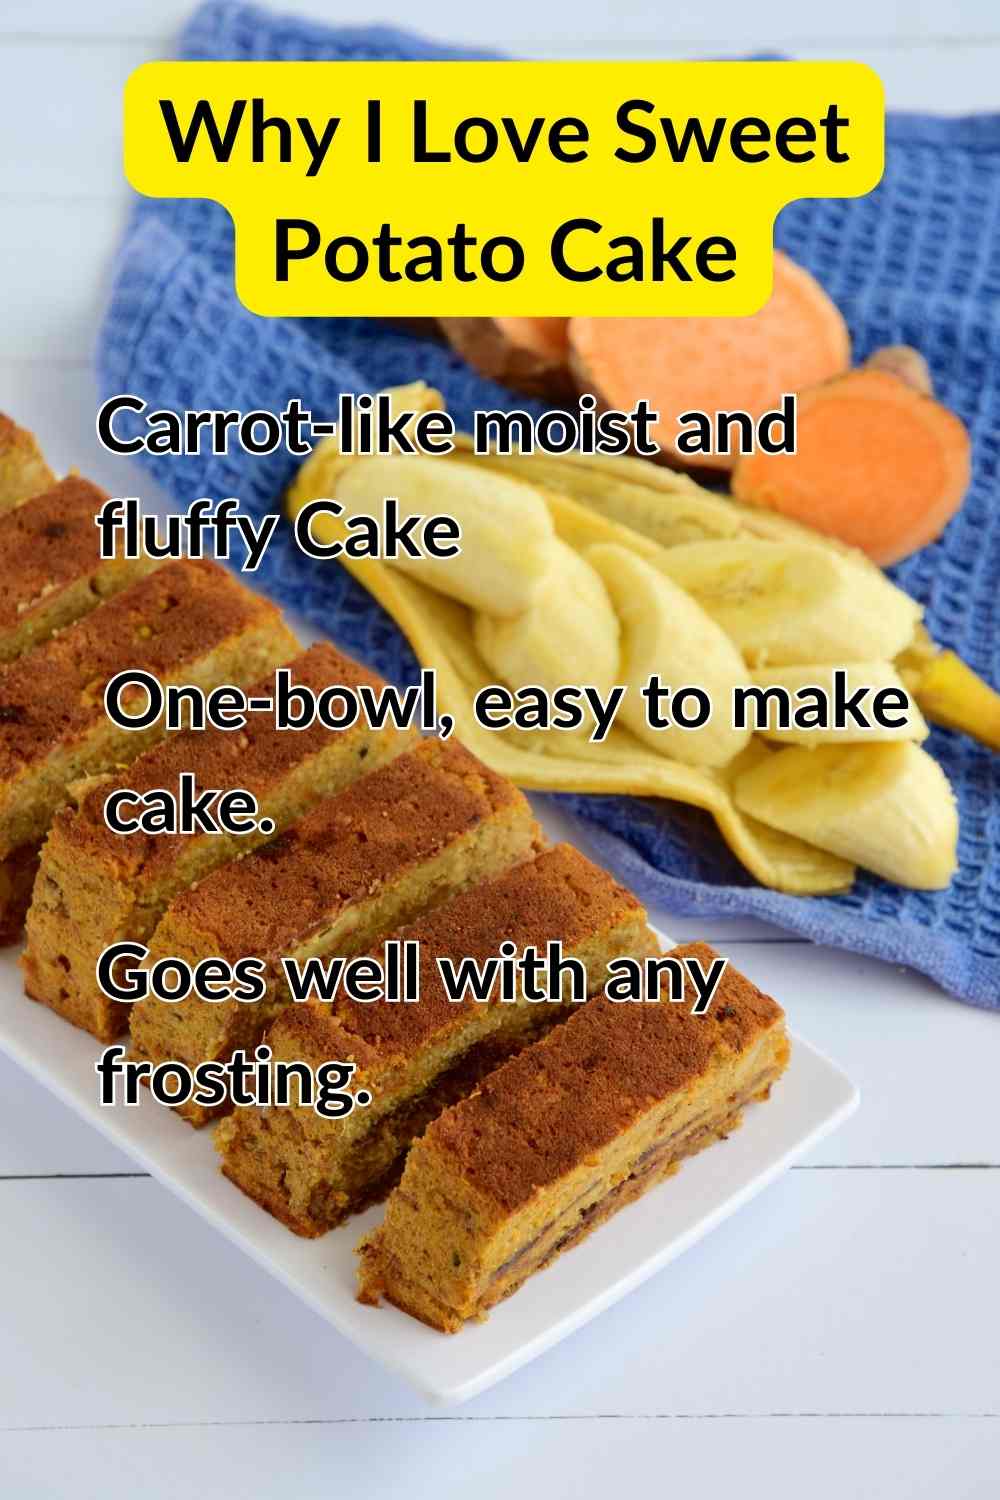 Why I love sweet potato cake
Easy to make
Goes well with any frosting
Its is moist and fluffy